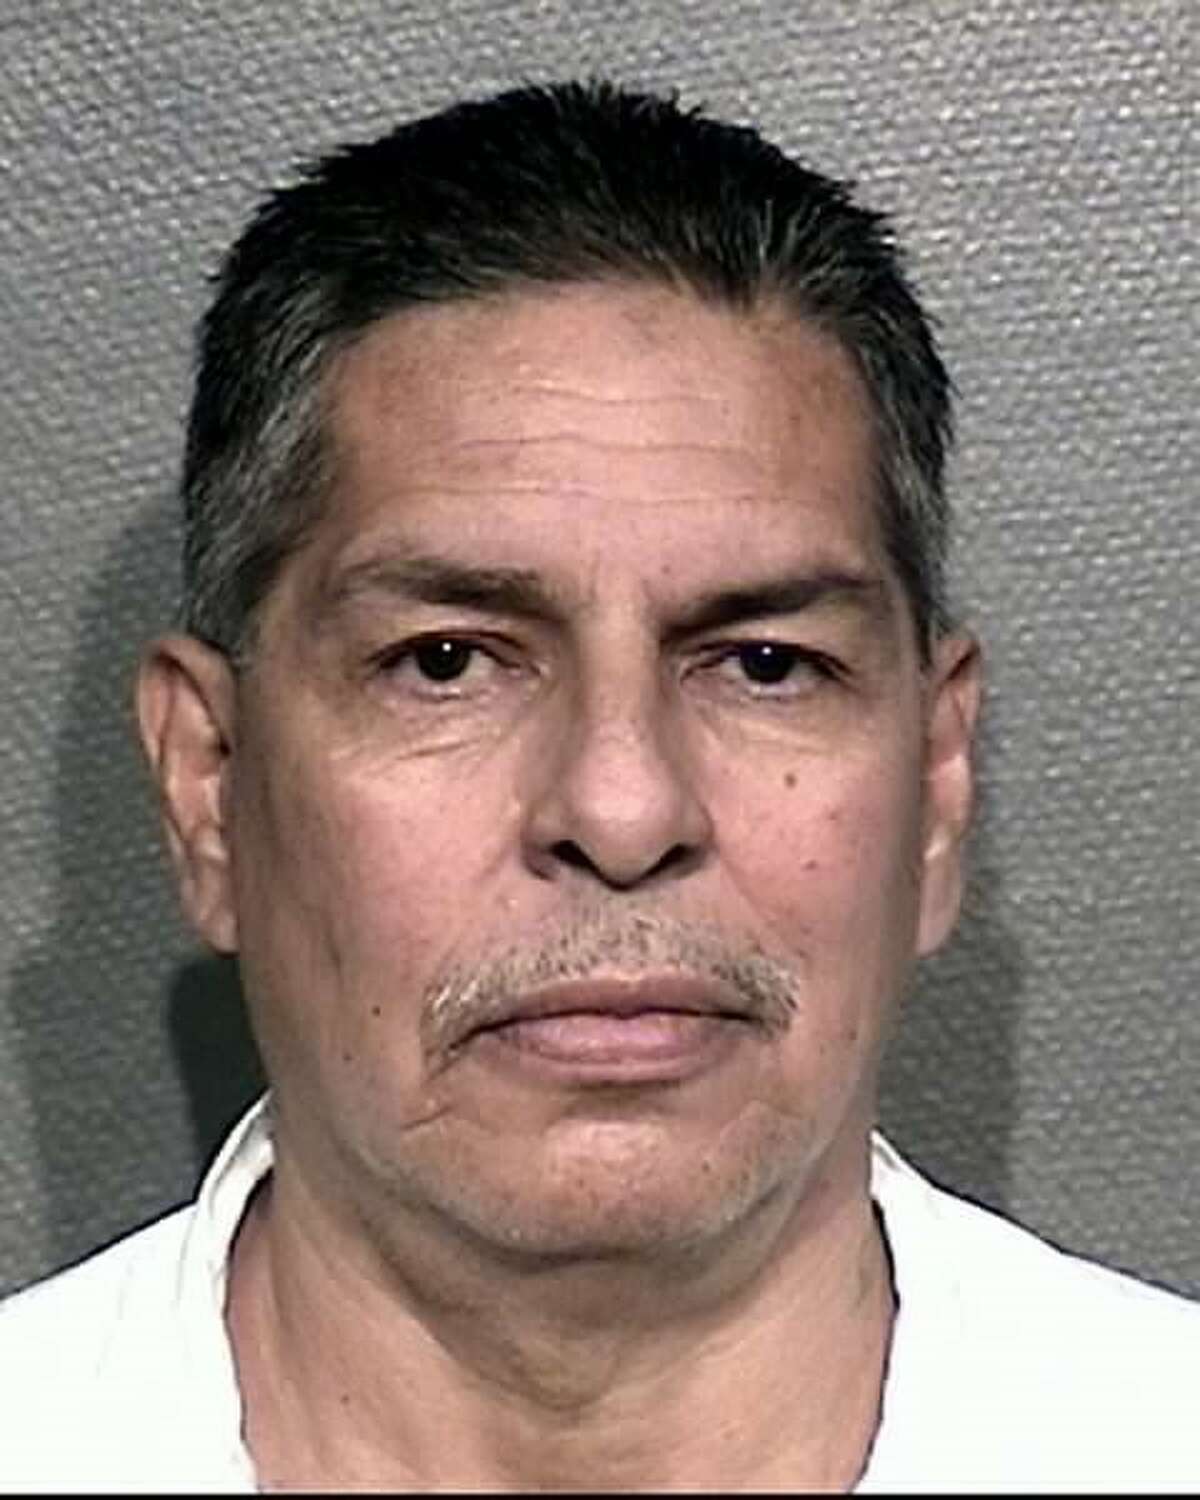 Paul Ramirez, 63, has been charged with murder in the fatal beating of his common-law wife on Sunday, Oct. 7, 2018.